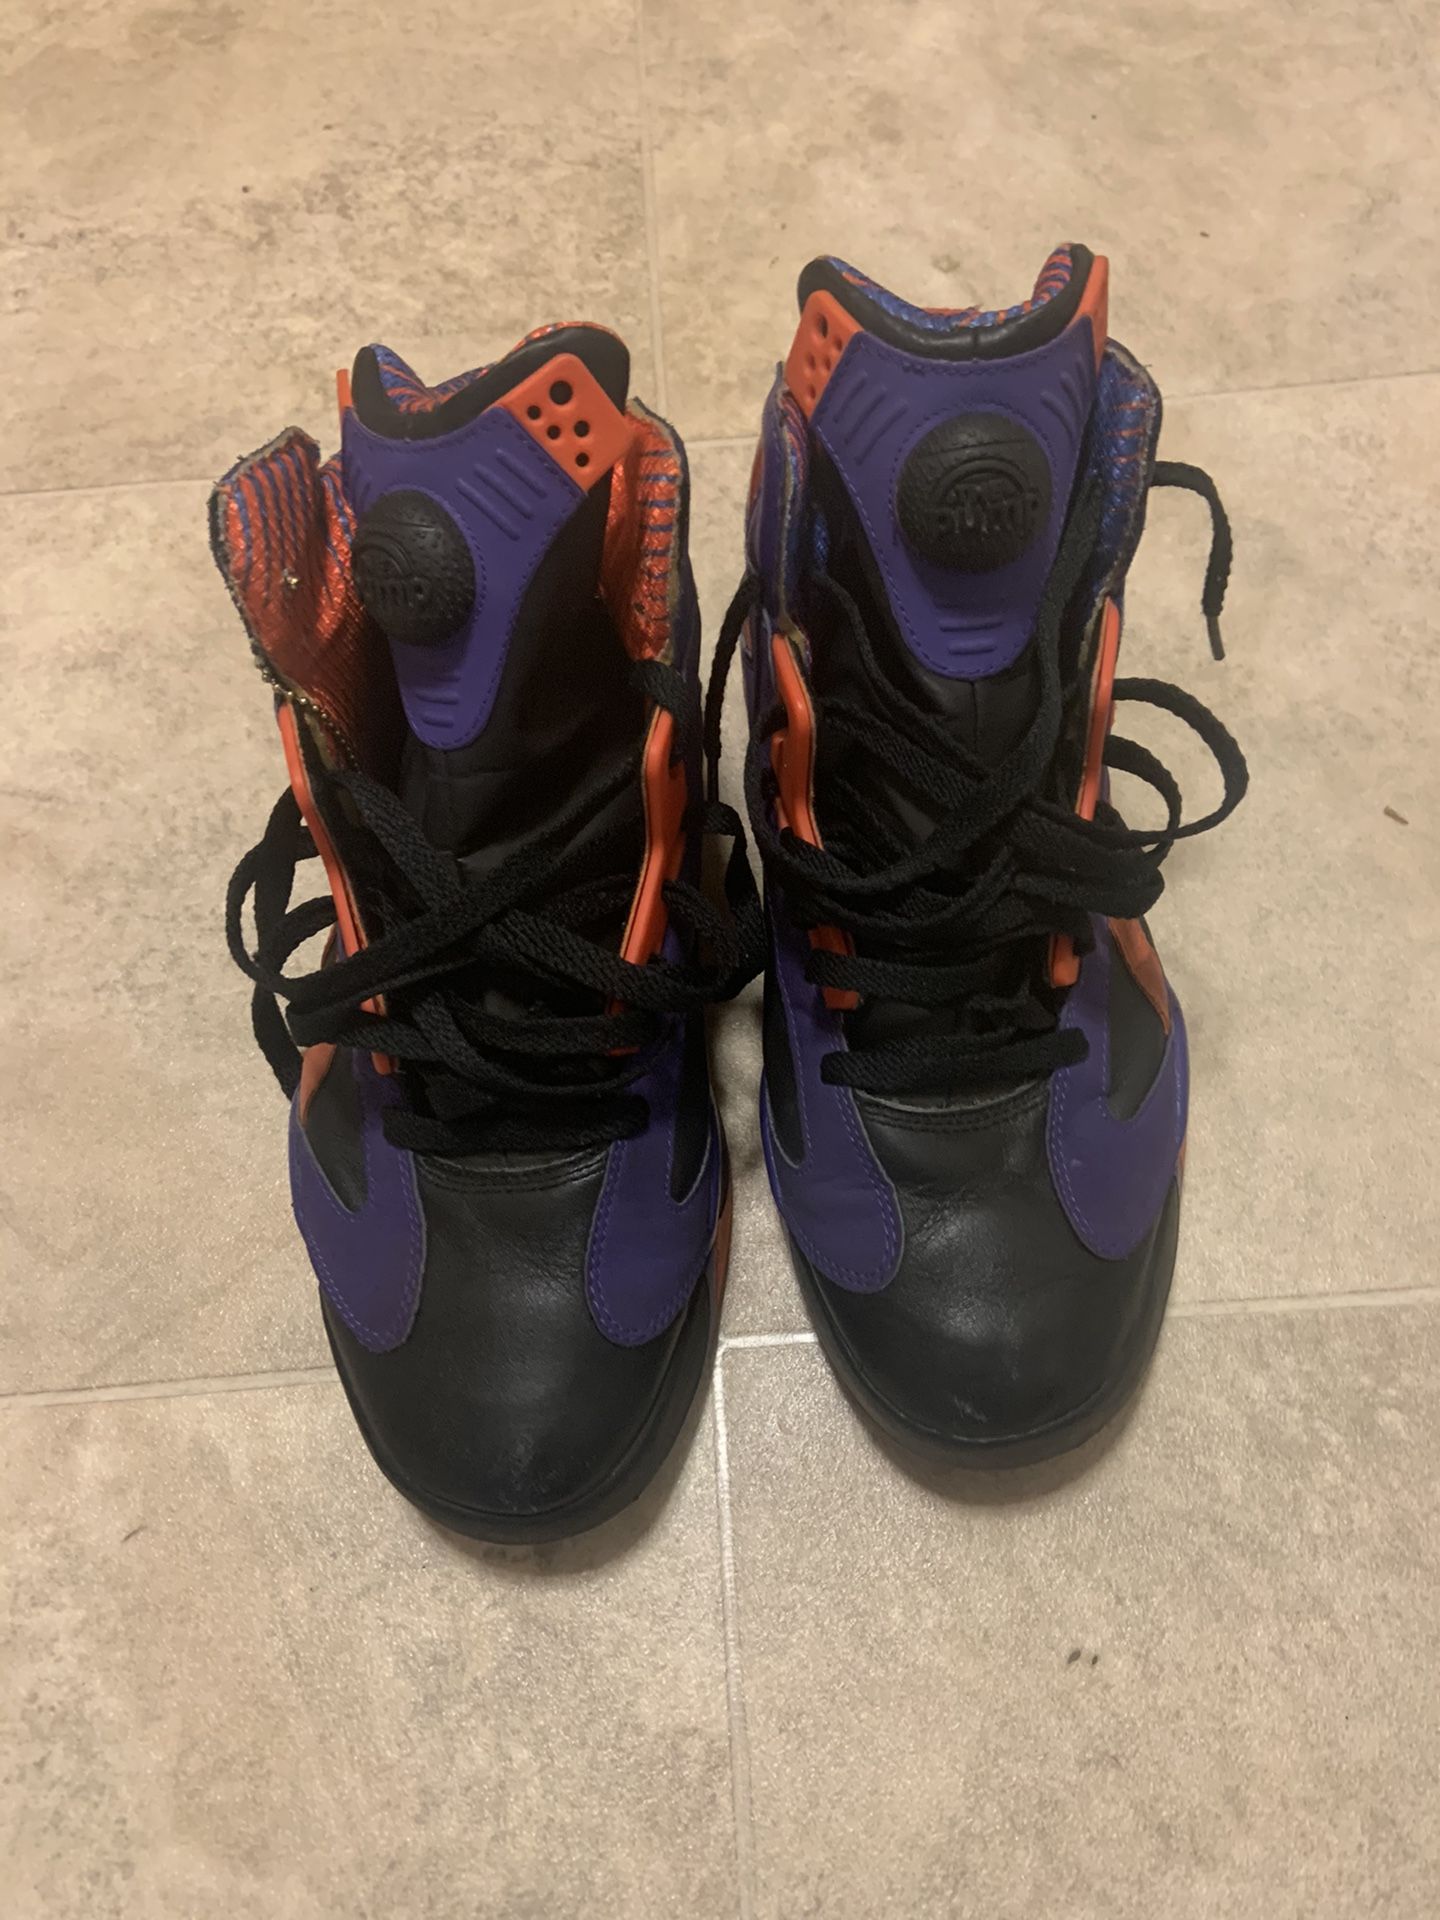 $15 and under (SHOES SALE) REEBOK Shaq attack